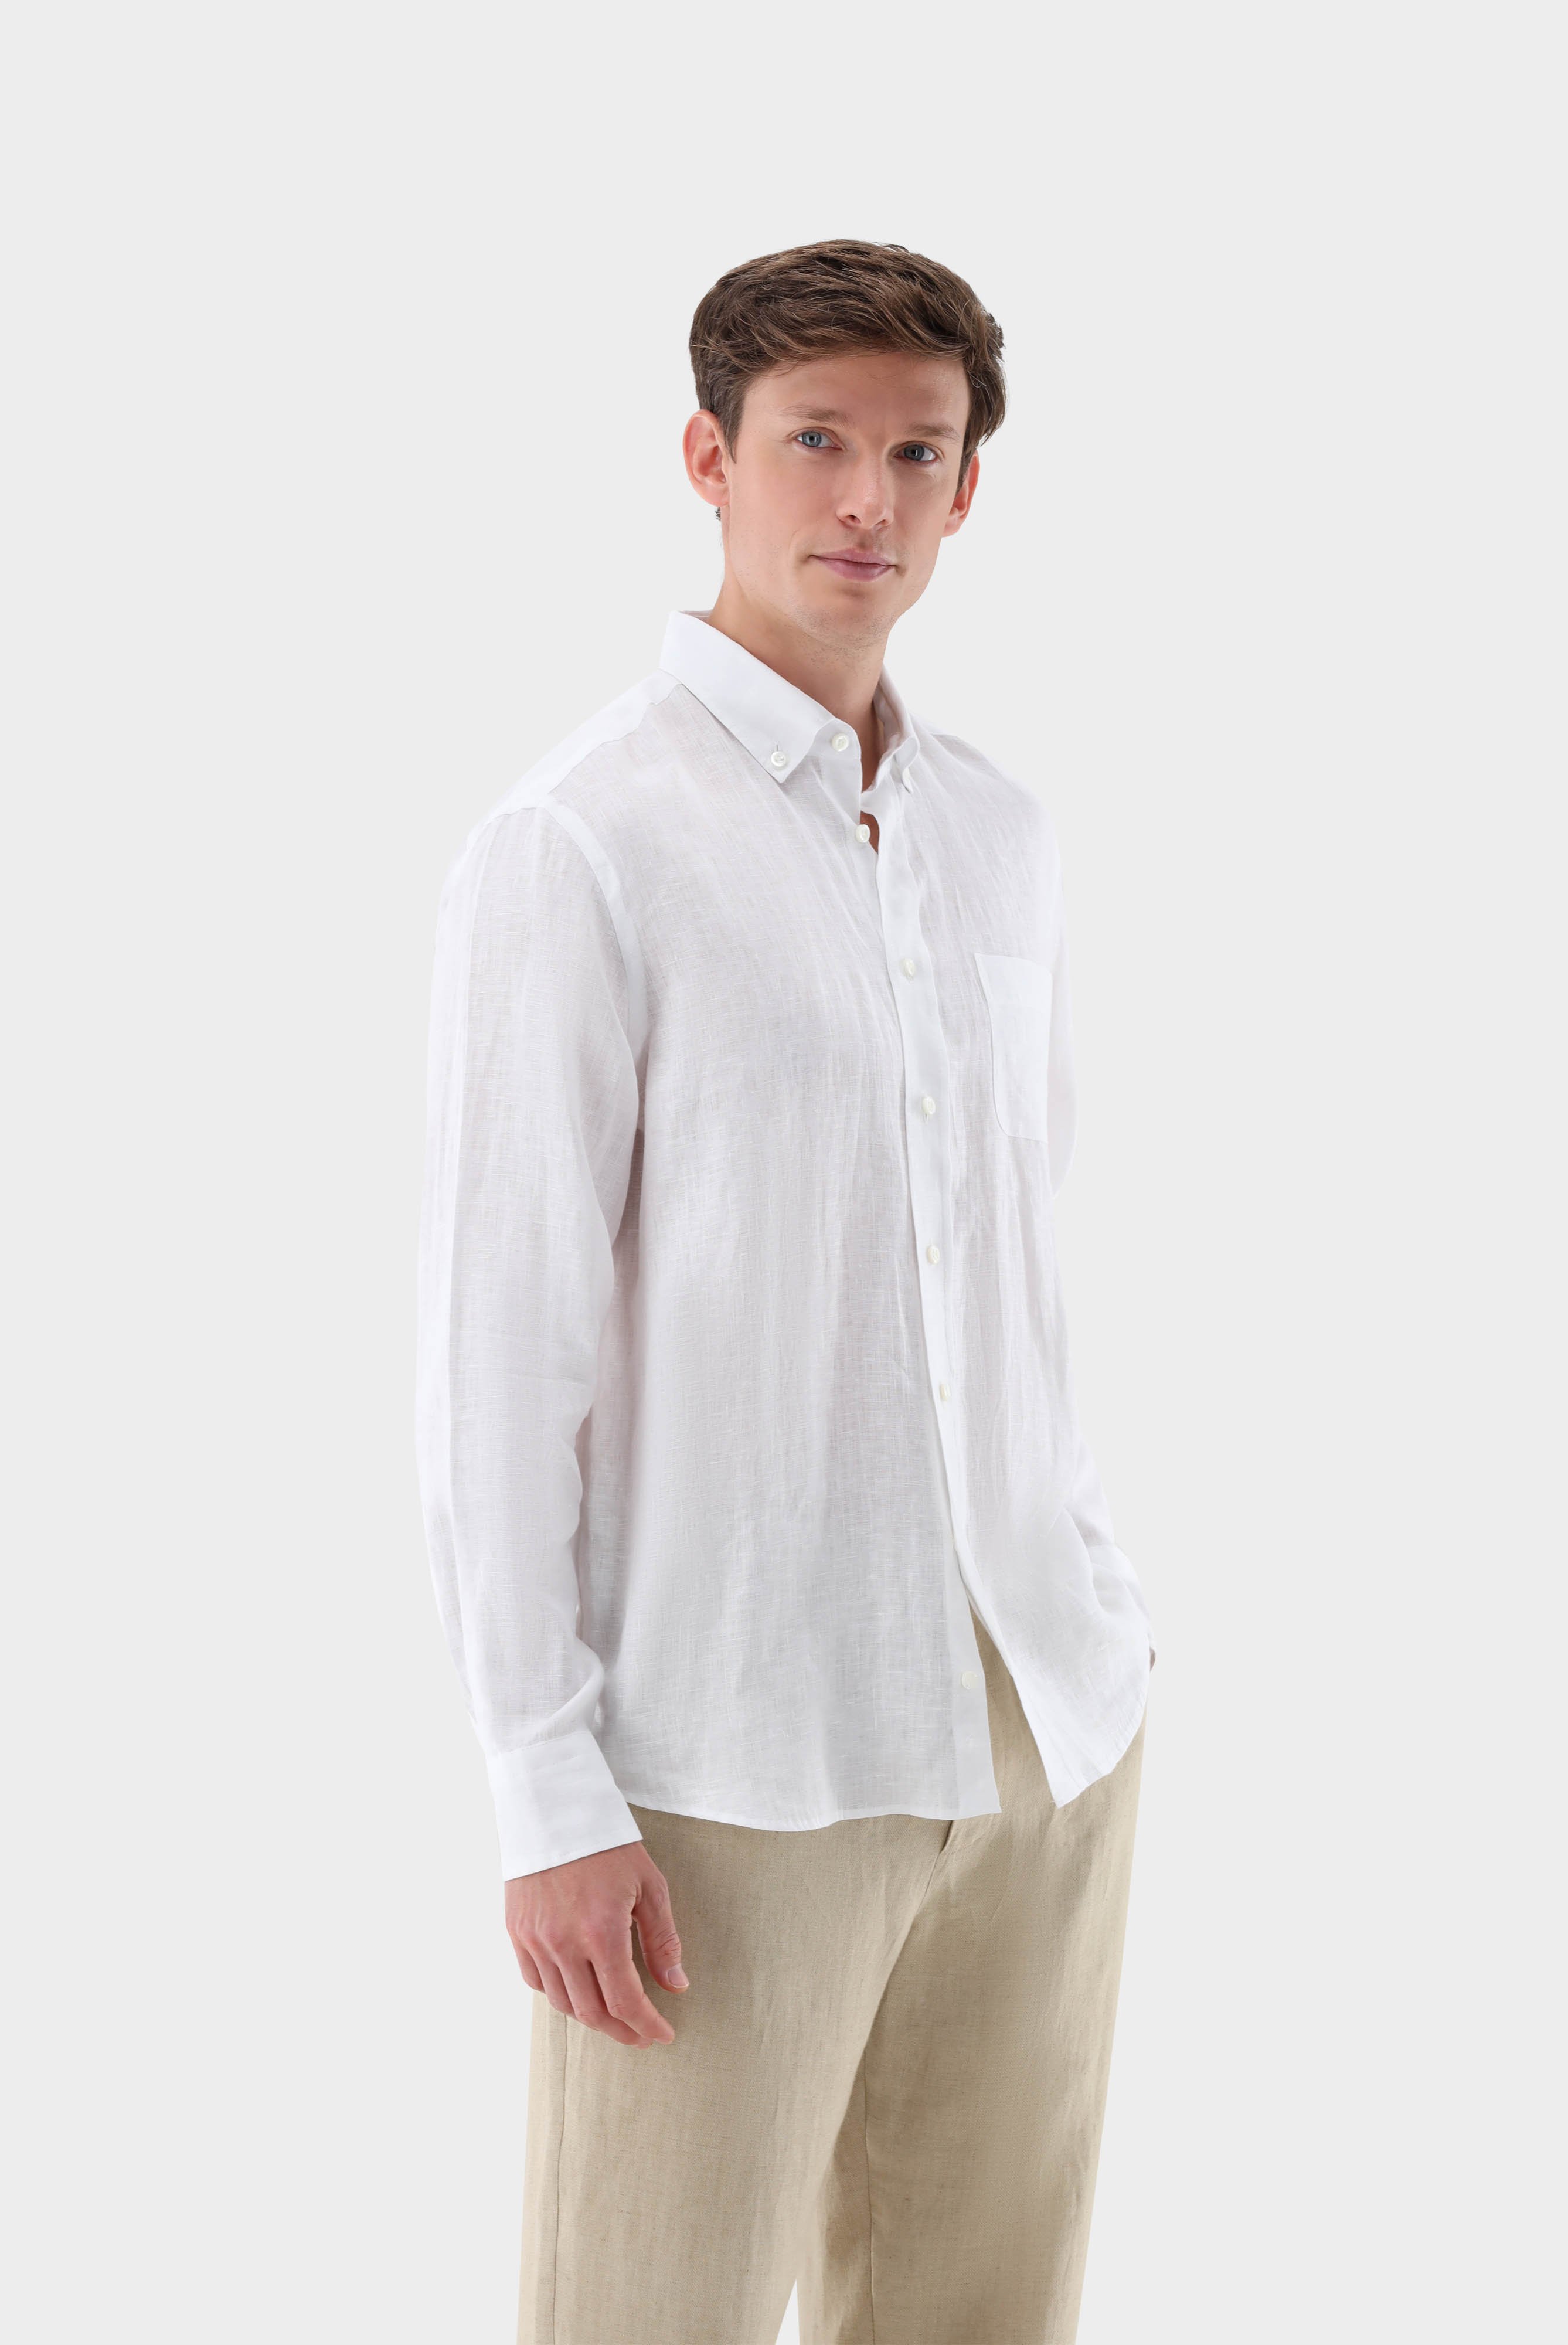 Casual Shirts+Linen Button-Down Collar Shirt Tailor Fit+20.2013.9V.150555.000.38